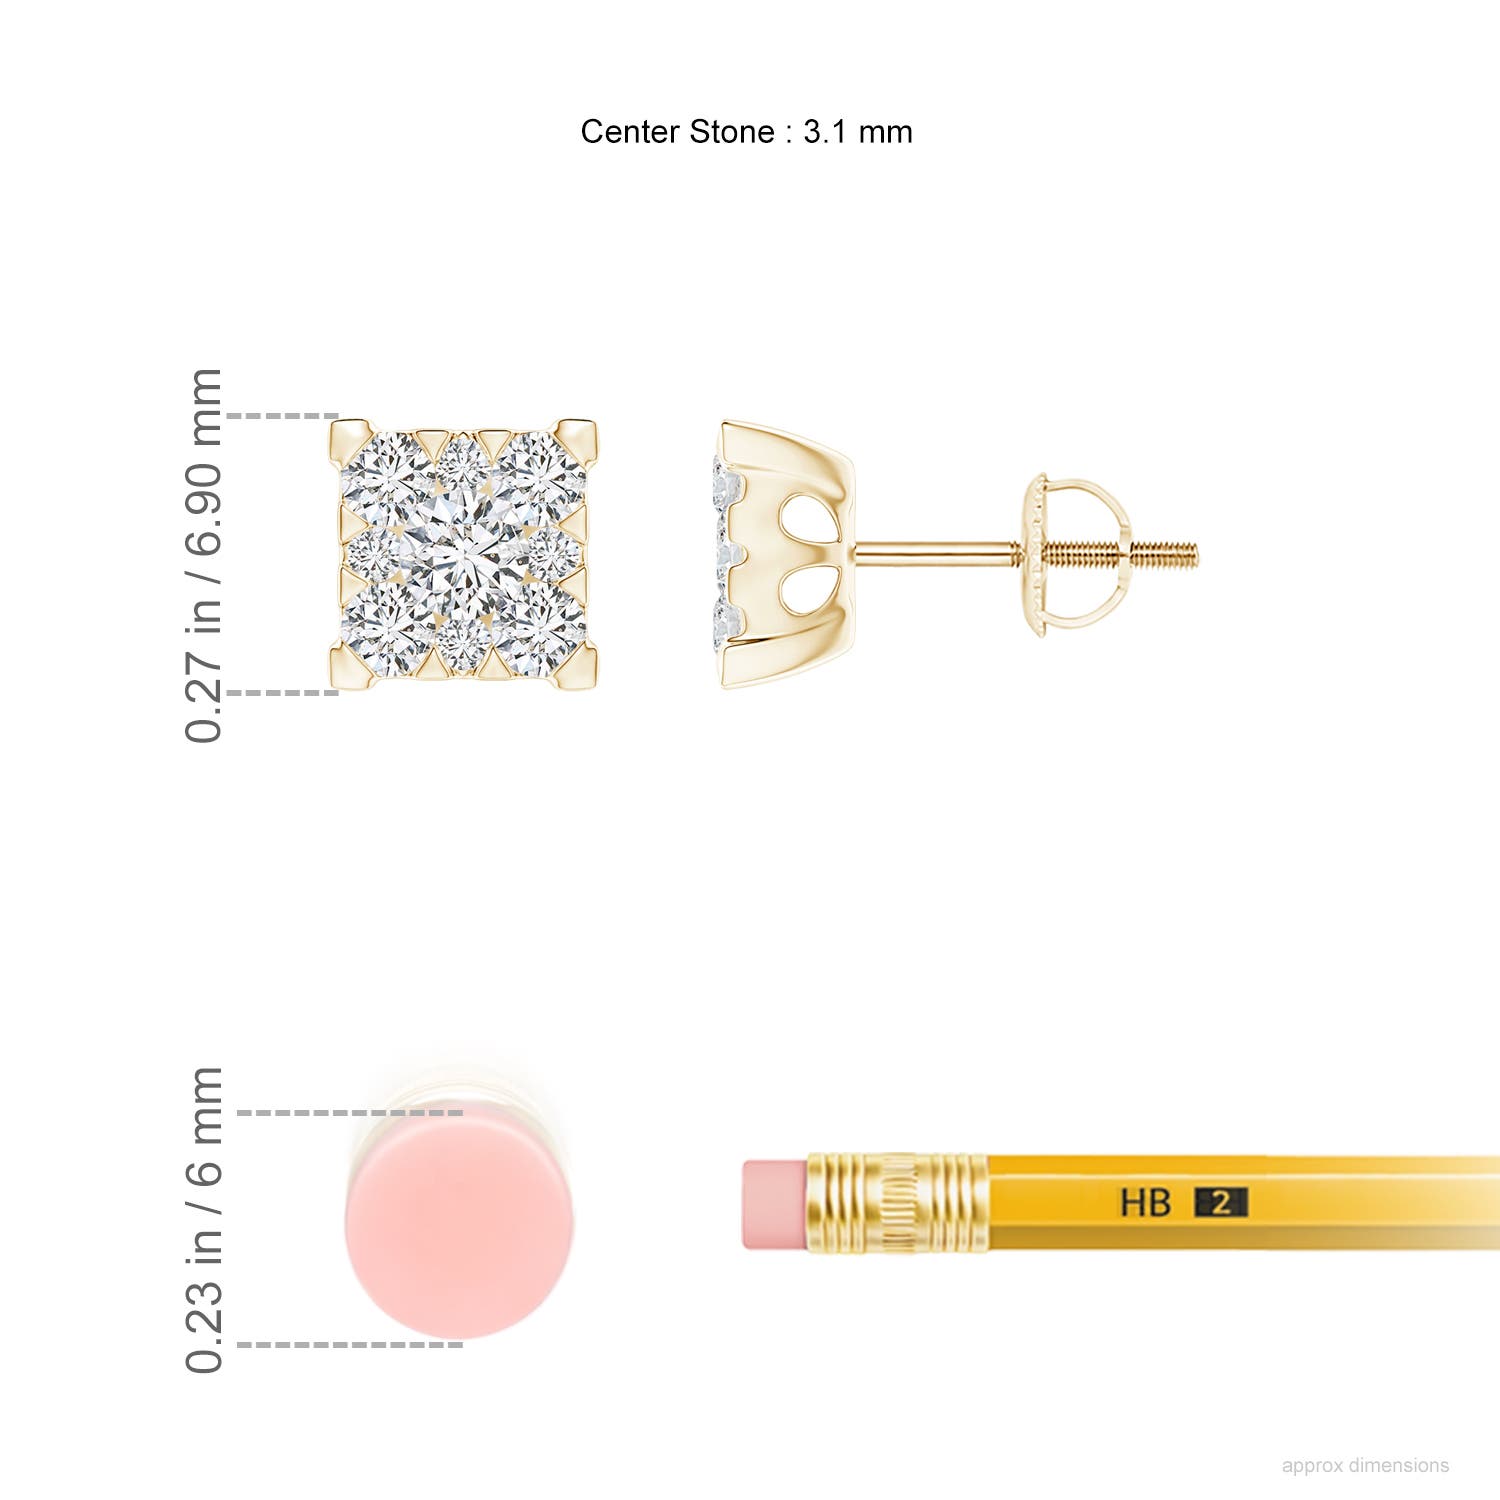 H, SI2 / 0.74 CT / 14 KT Yellow Gold